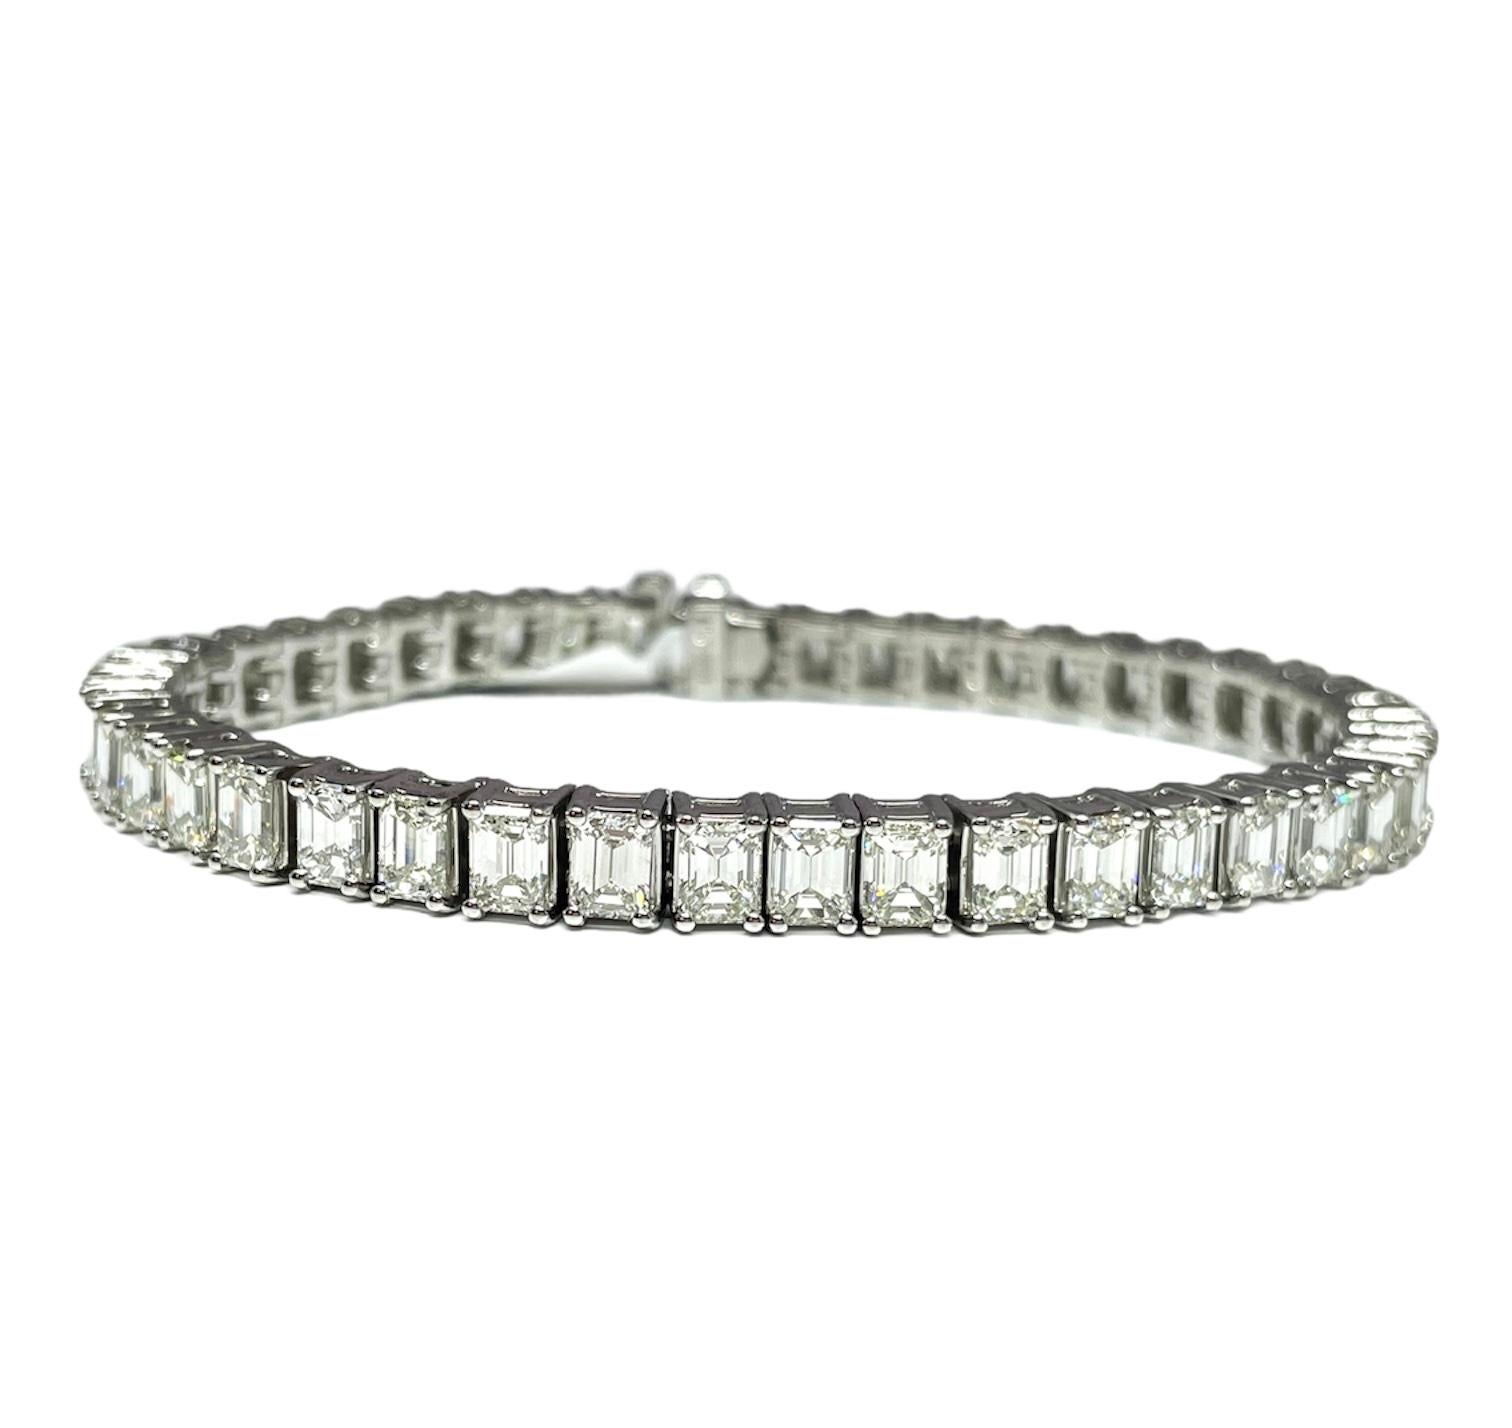 This beautiful emerald-cut diamond bracelet features 48 diamonds weighing 15.77 cts set in platinum. The diamonds are 5mm in length and are E-F in color and VVS2-VS1 in clarity. 

